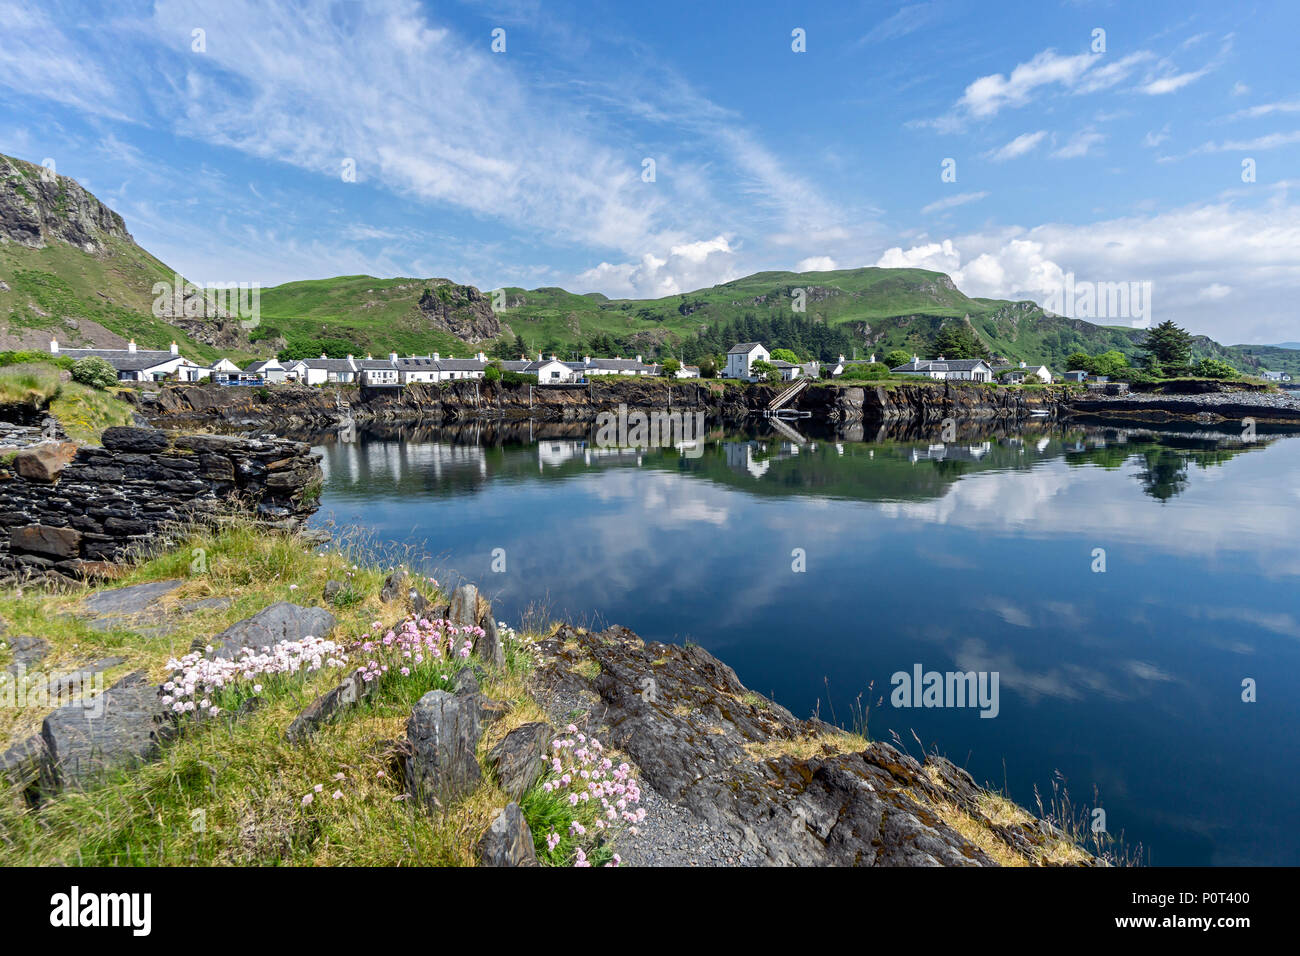 Disused old slate mine at village of Easdale on the island of Seil south of  Oban Argyll & Bute Scotland UK Stock Photo